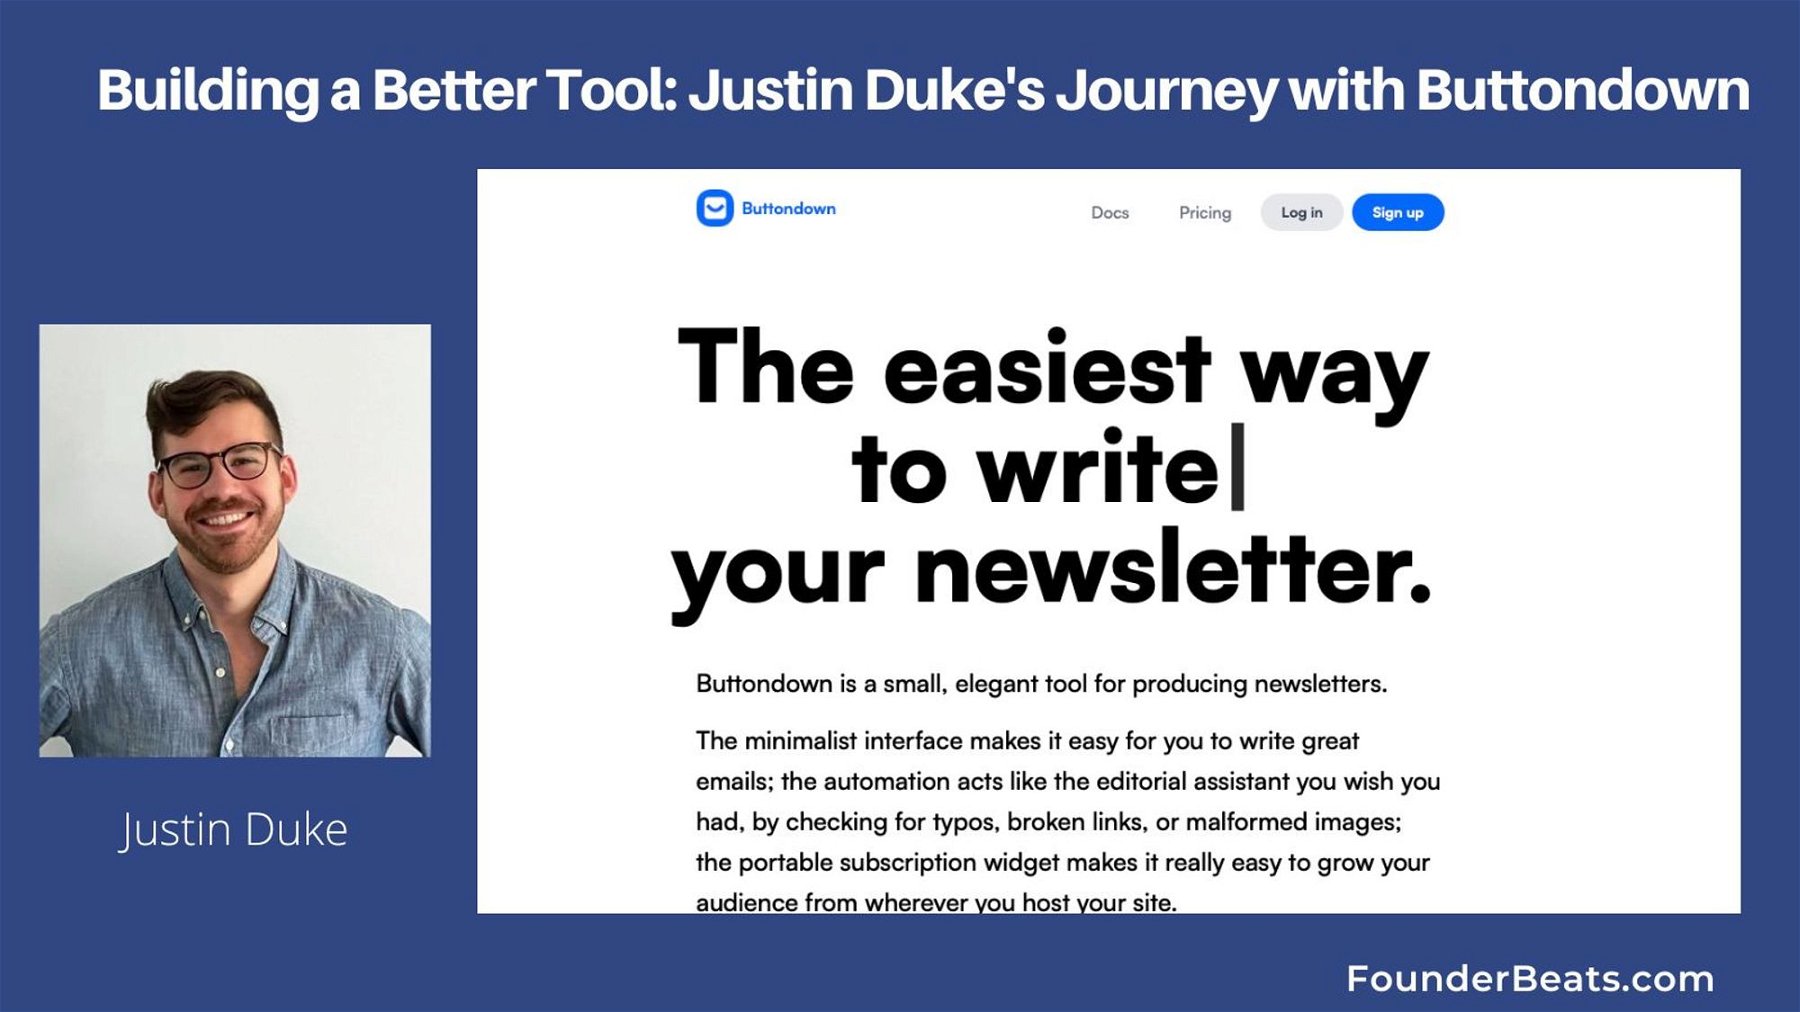 Building a Better Tool: Justin Duke's Journey with Buttondown